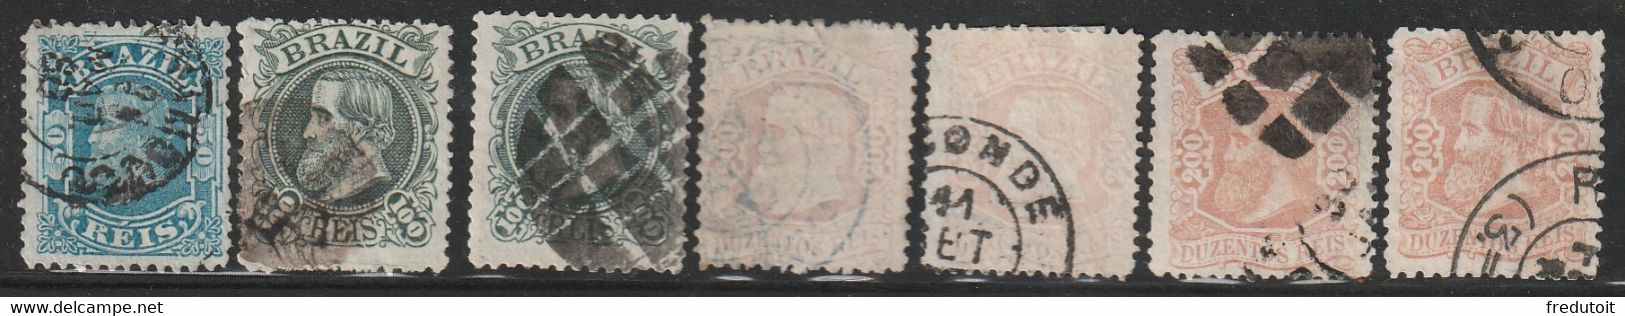 BRESIL - 7 Timbres Obl (1881-85) Pedro II - Gebraucht